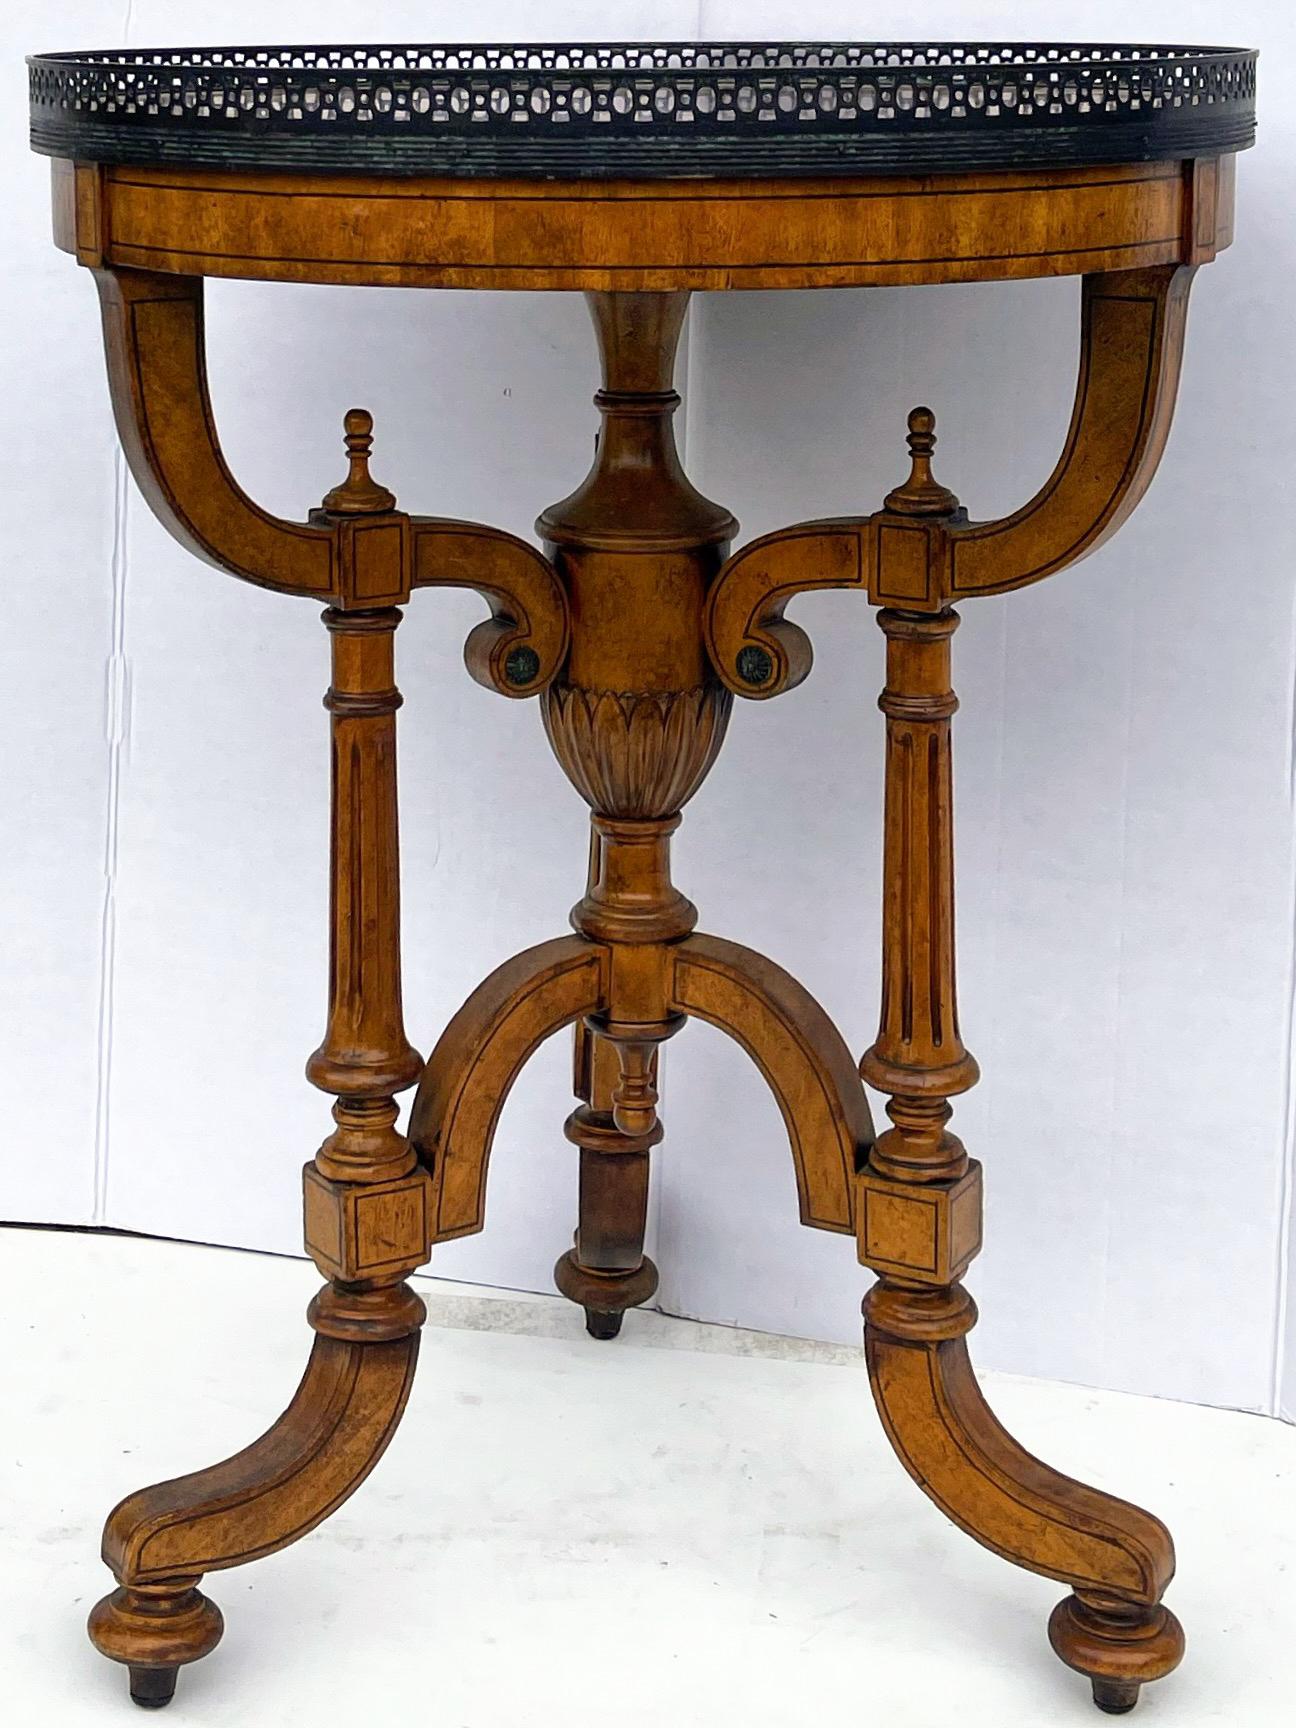 Neoclassical Empire Style Burl Walnut & Bronze Carved Side Tables By Theodore Alexander- Pair For Sale